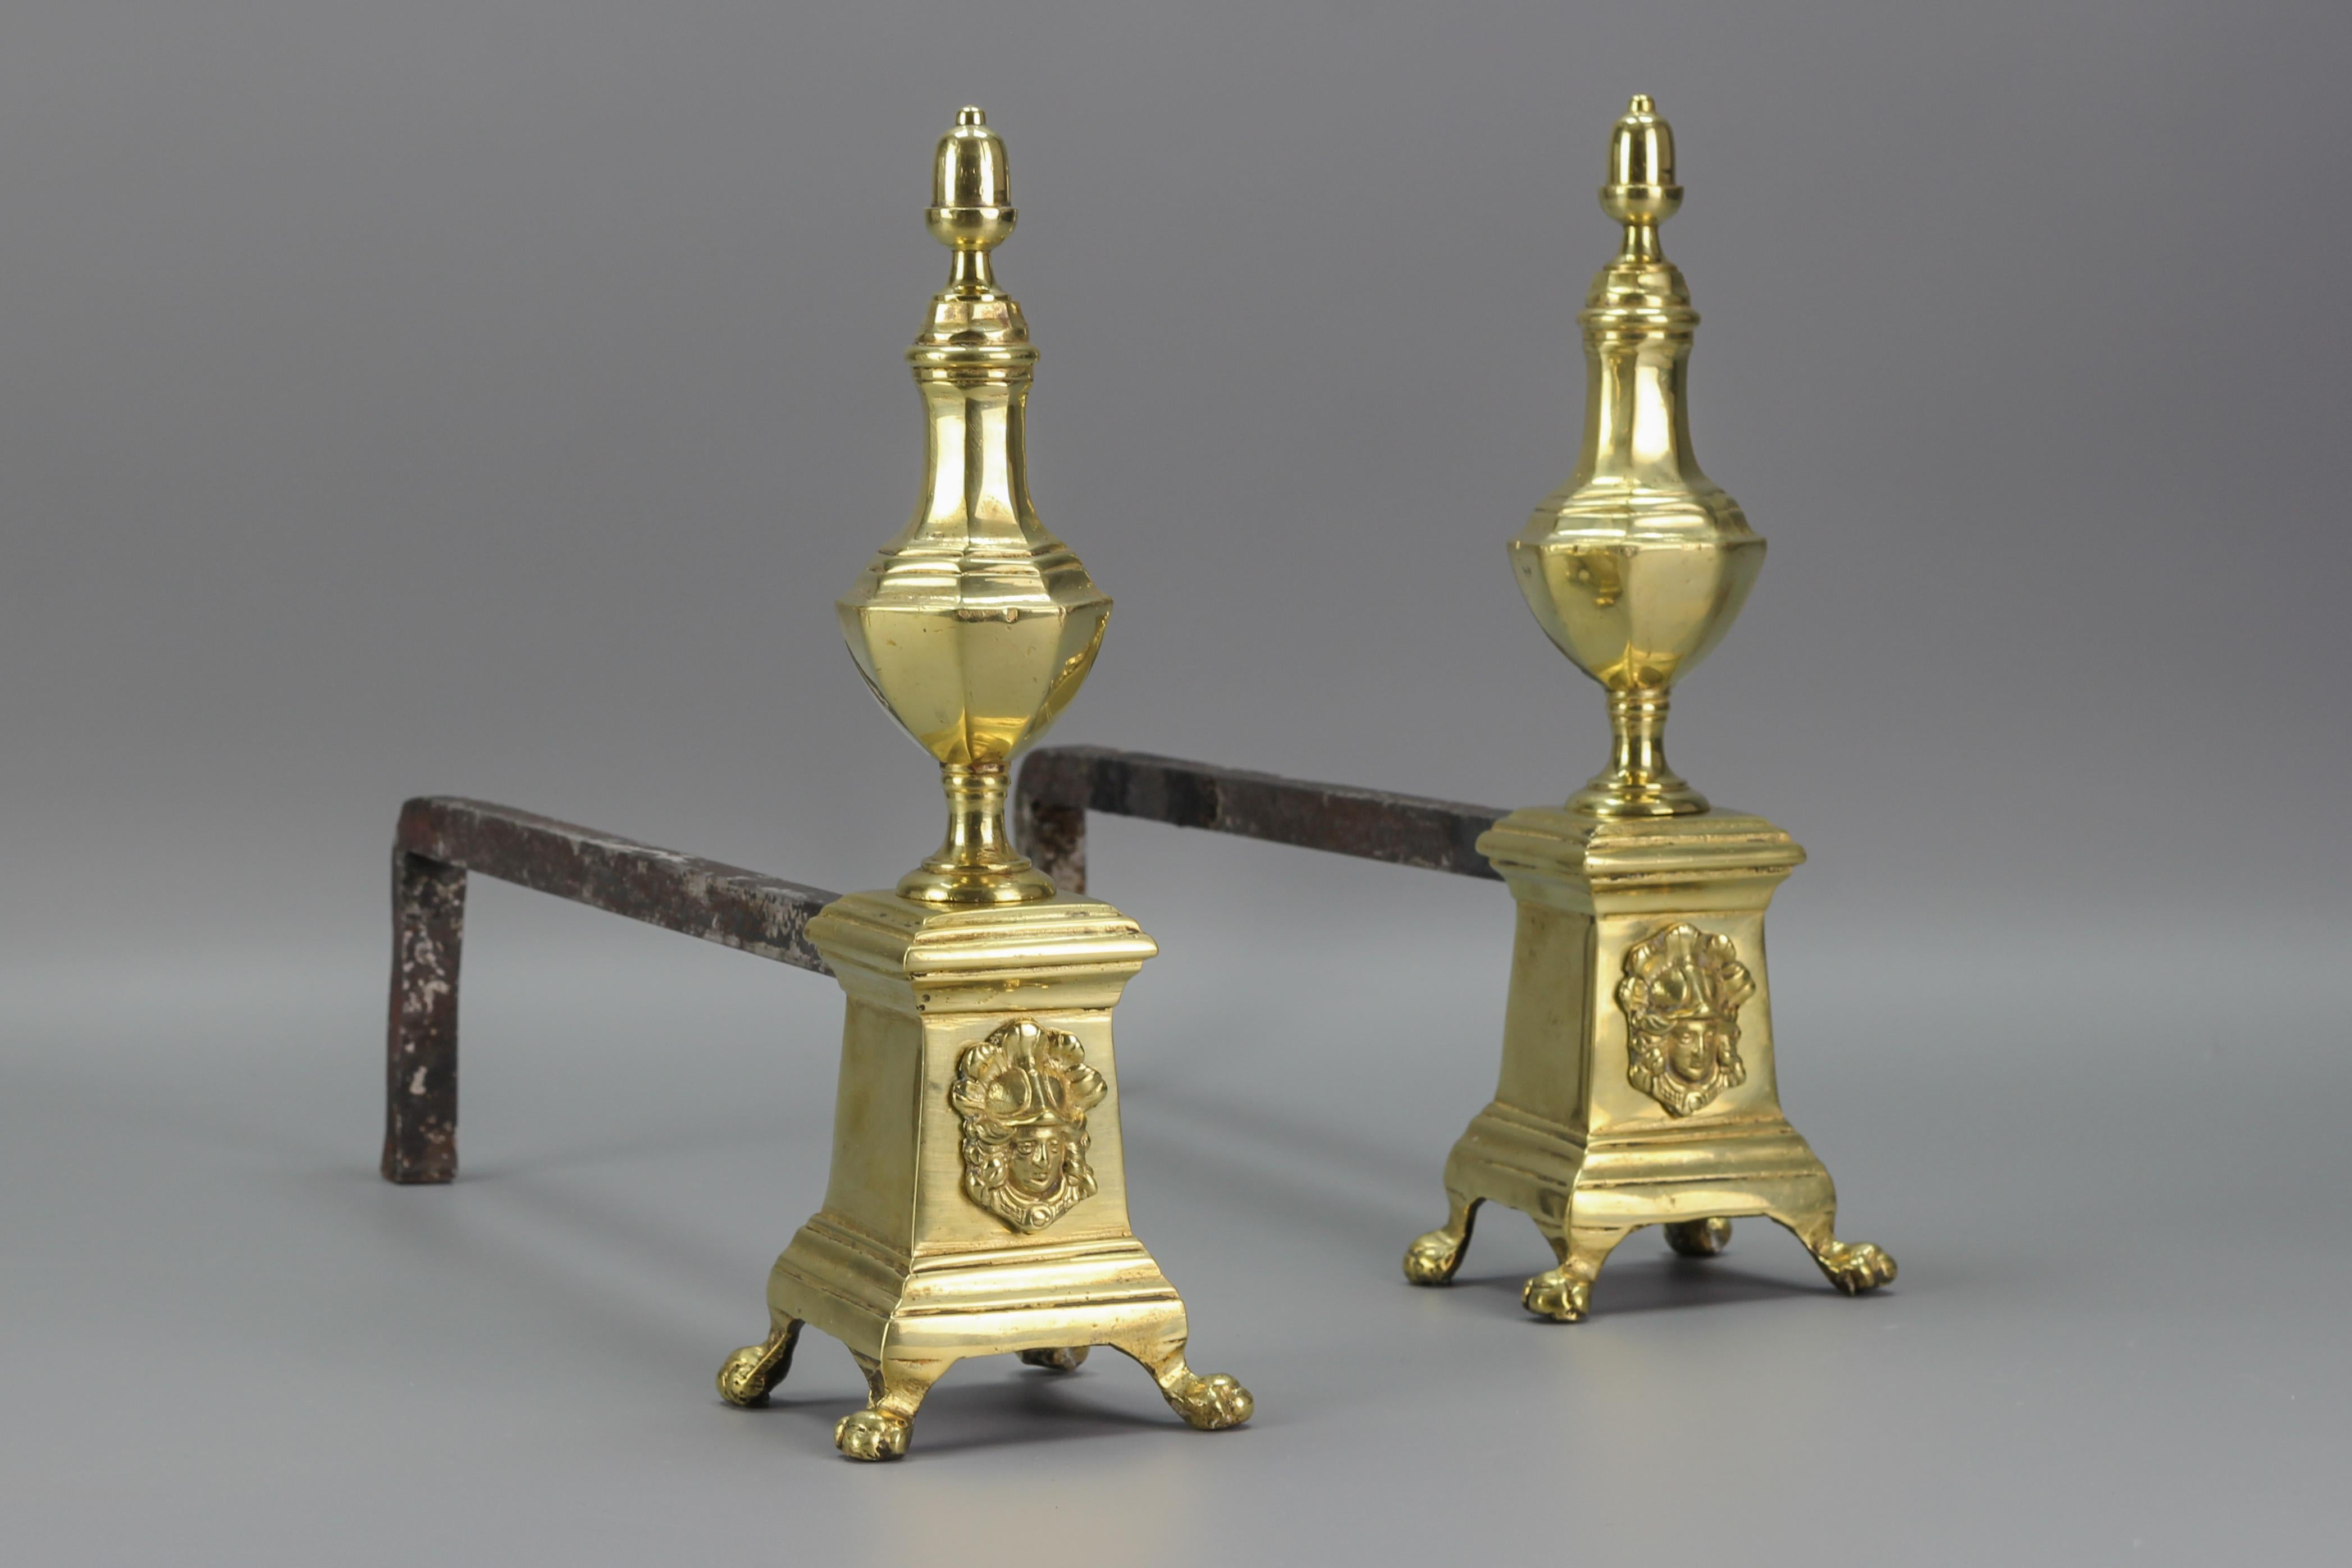 A pair of antique firedogs made of bronze and iron, France, early 20th Century. These marvelous firedogs or andirons feature bronze construction in baluster form, raised on paw feet, decorated with the goddess's face on the front.
In good condition